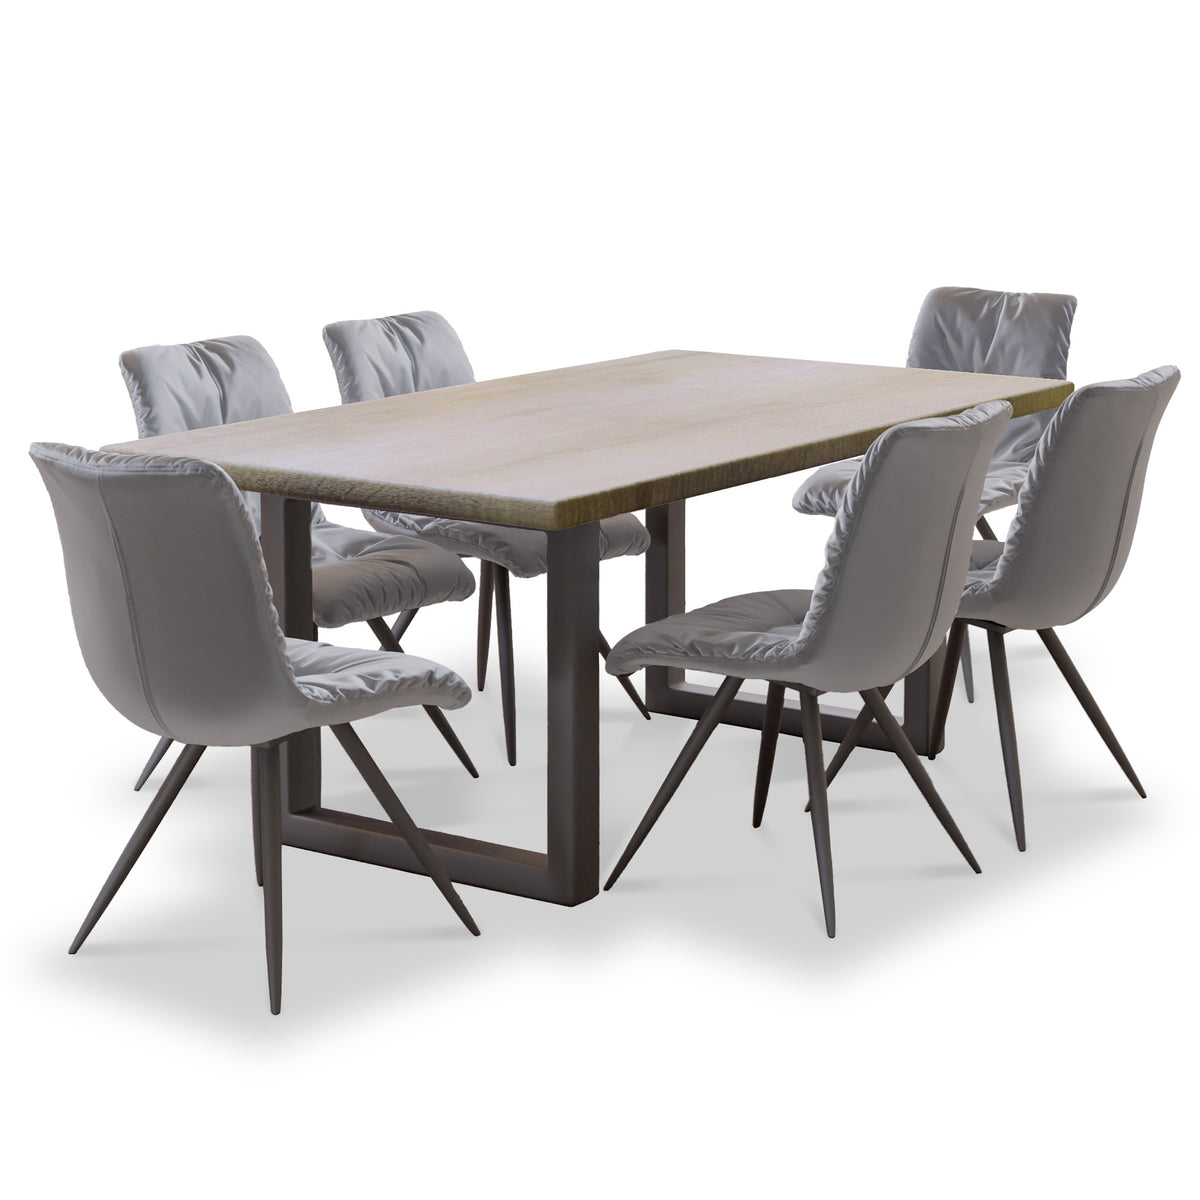 Thelma 1.8m Dining Table with 6 Addison Light Grey Chairs